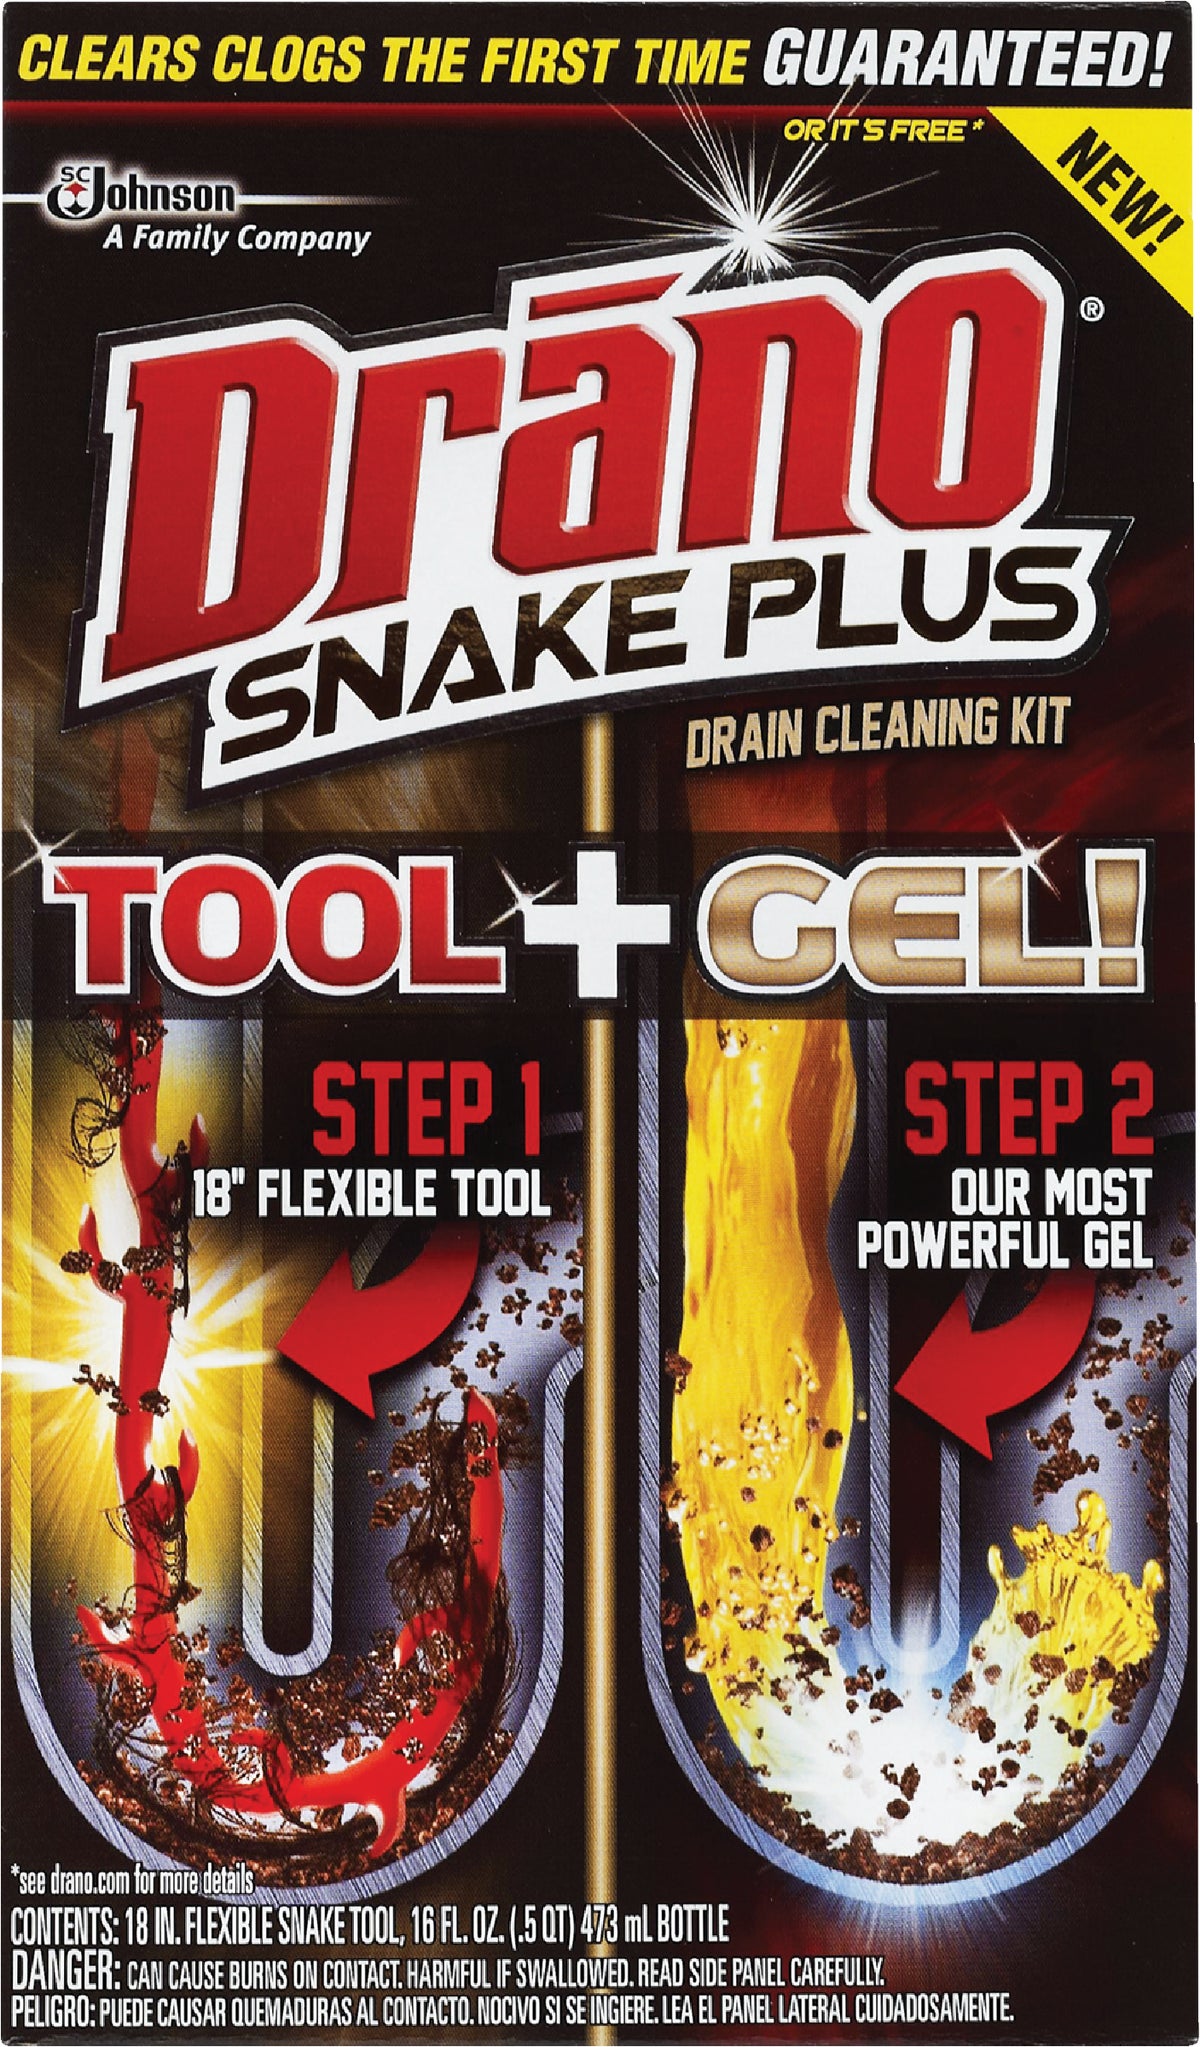 NEW! Drano Snake Plus Tool + Gel System 23 inch Snake included 16 fl oz  (2-Pack)